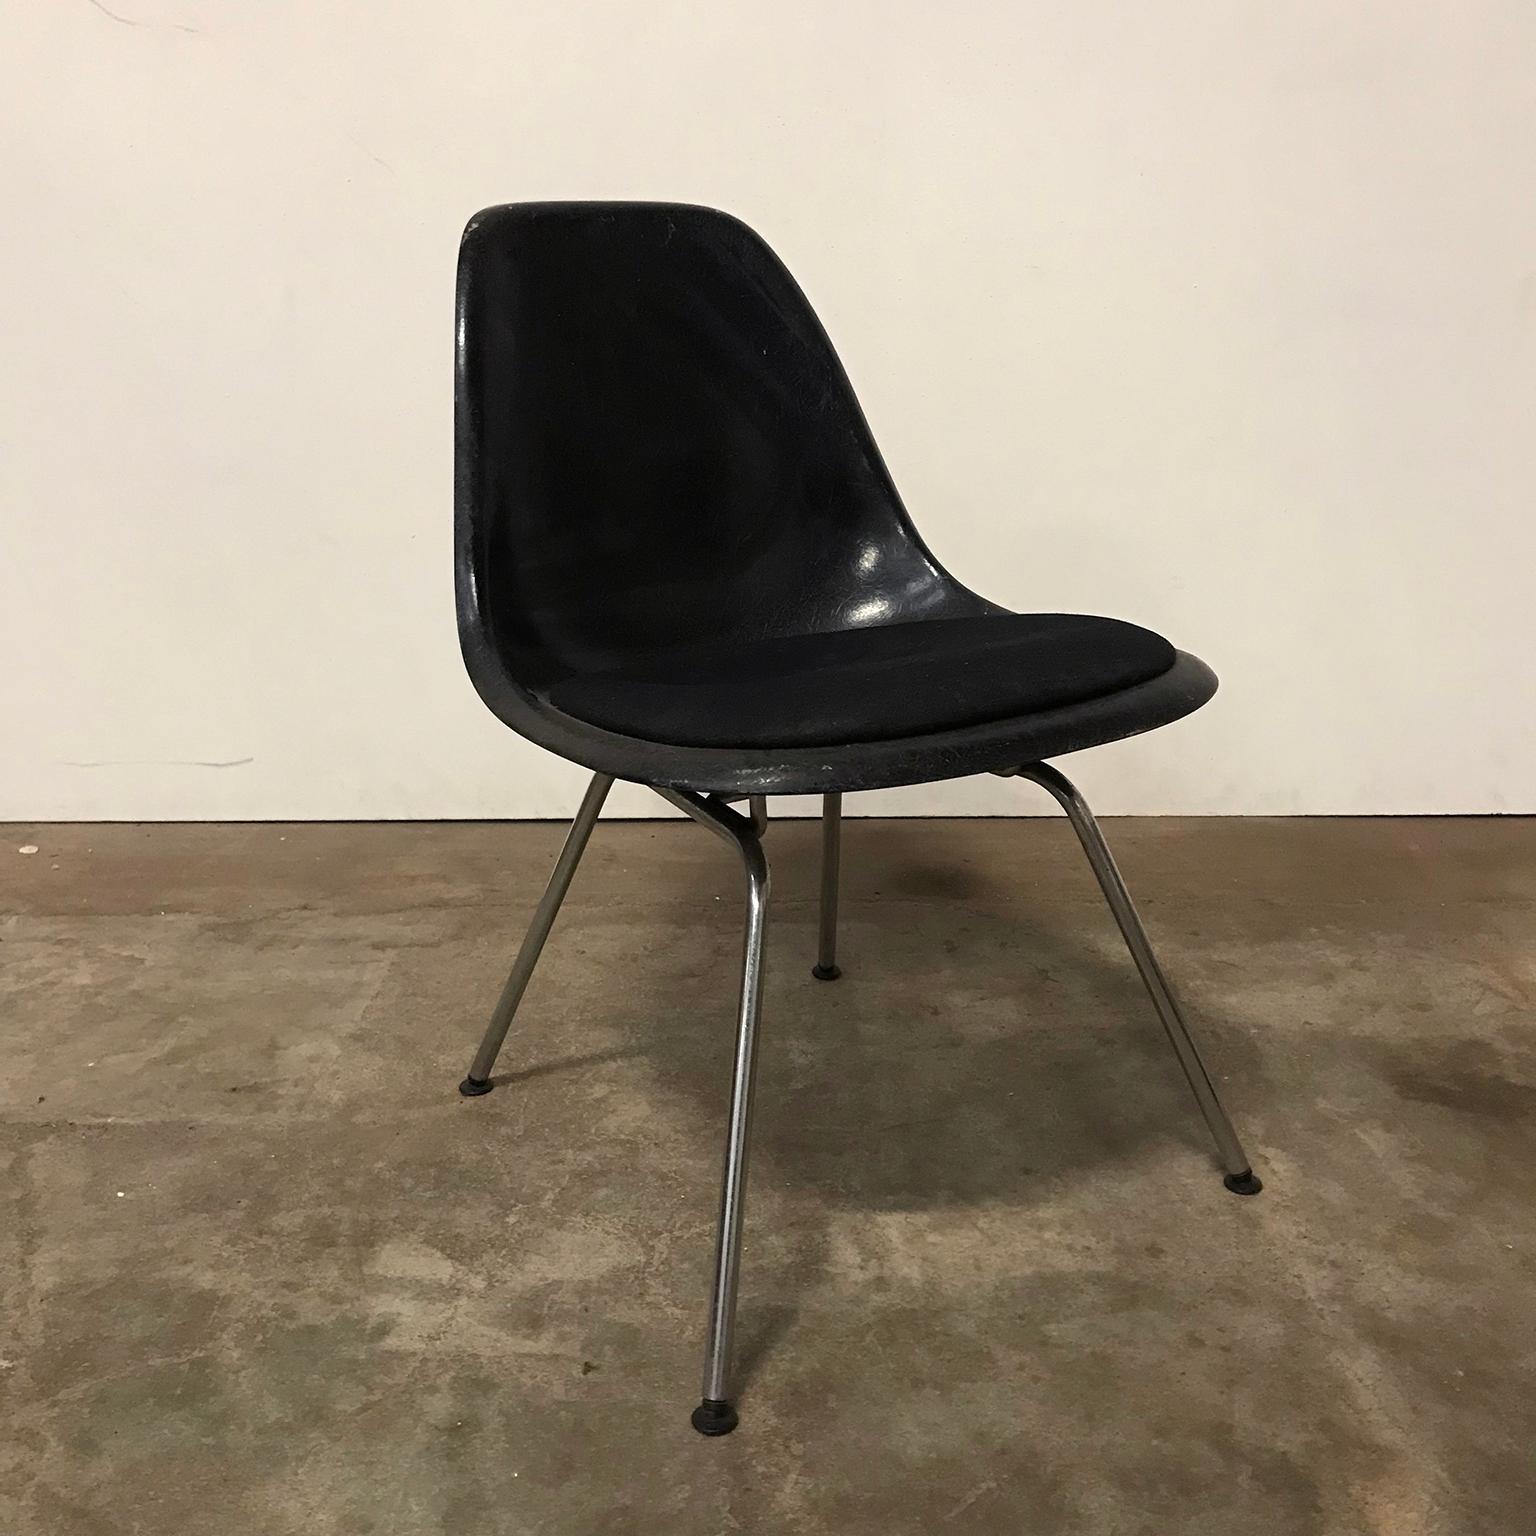 Eames side shells in black with black cushion by Herman Miller. Availability of five shells. The shells show traces of wear like some stains on the cushion and some on the shells. Picture #2 show the shell on an H-base. Also other bases are